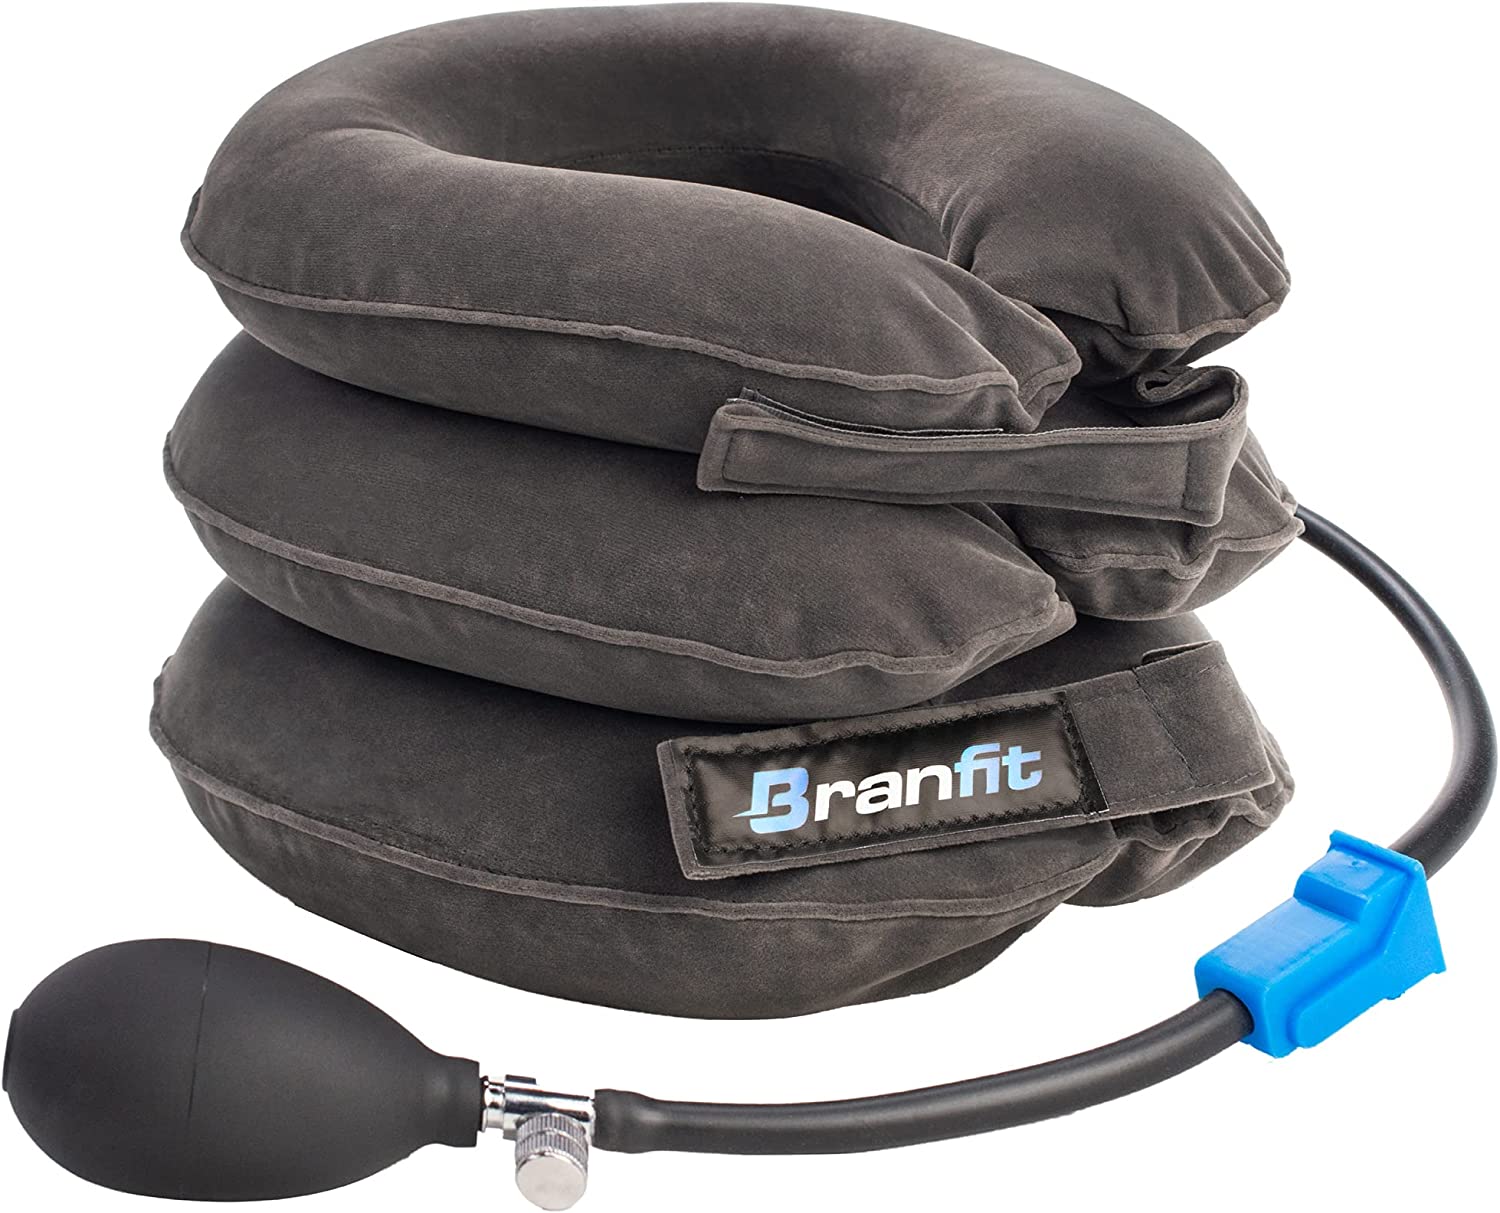 Review of Cervical Neck Traction Device and Neck Brace by BRANFIT